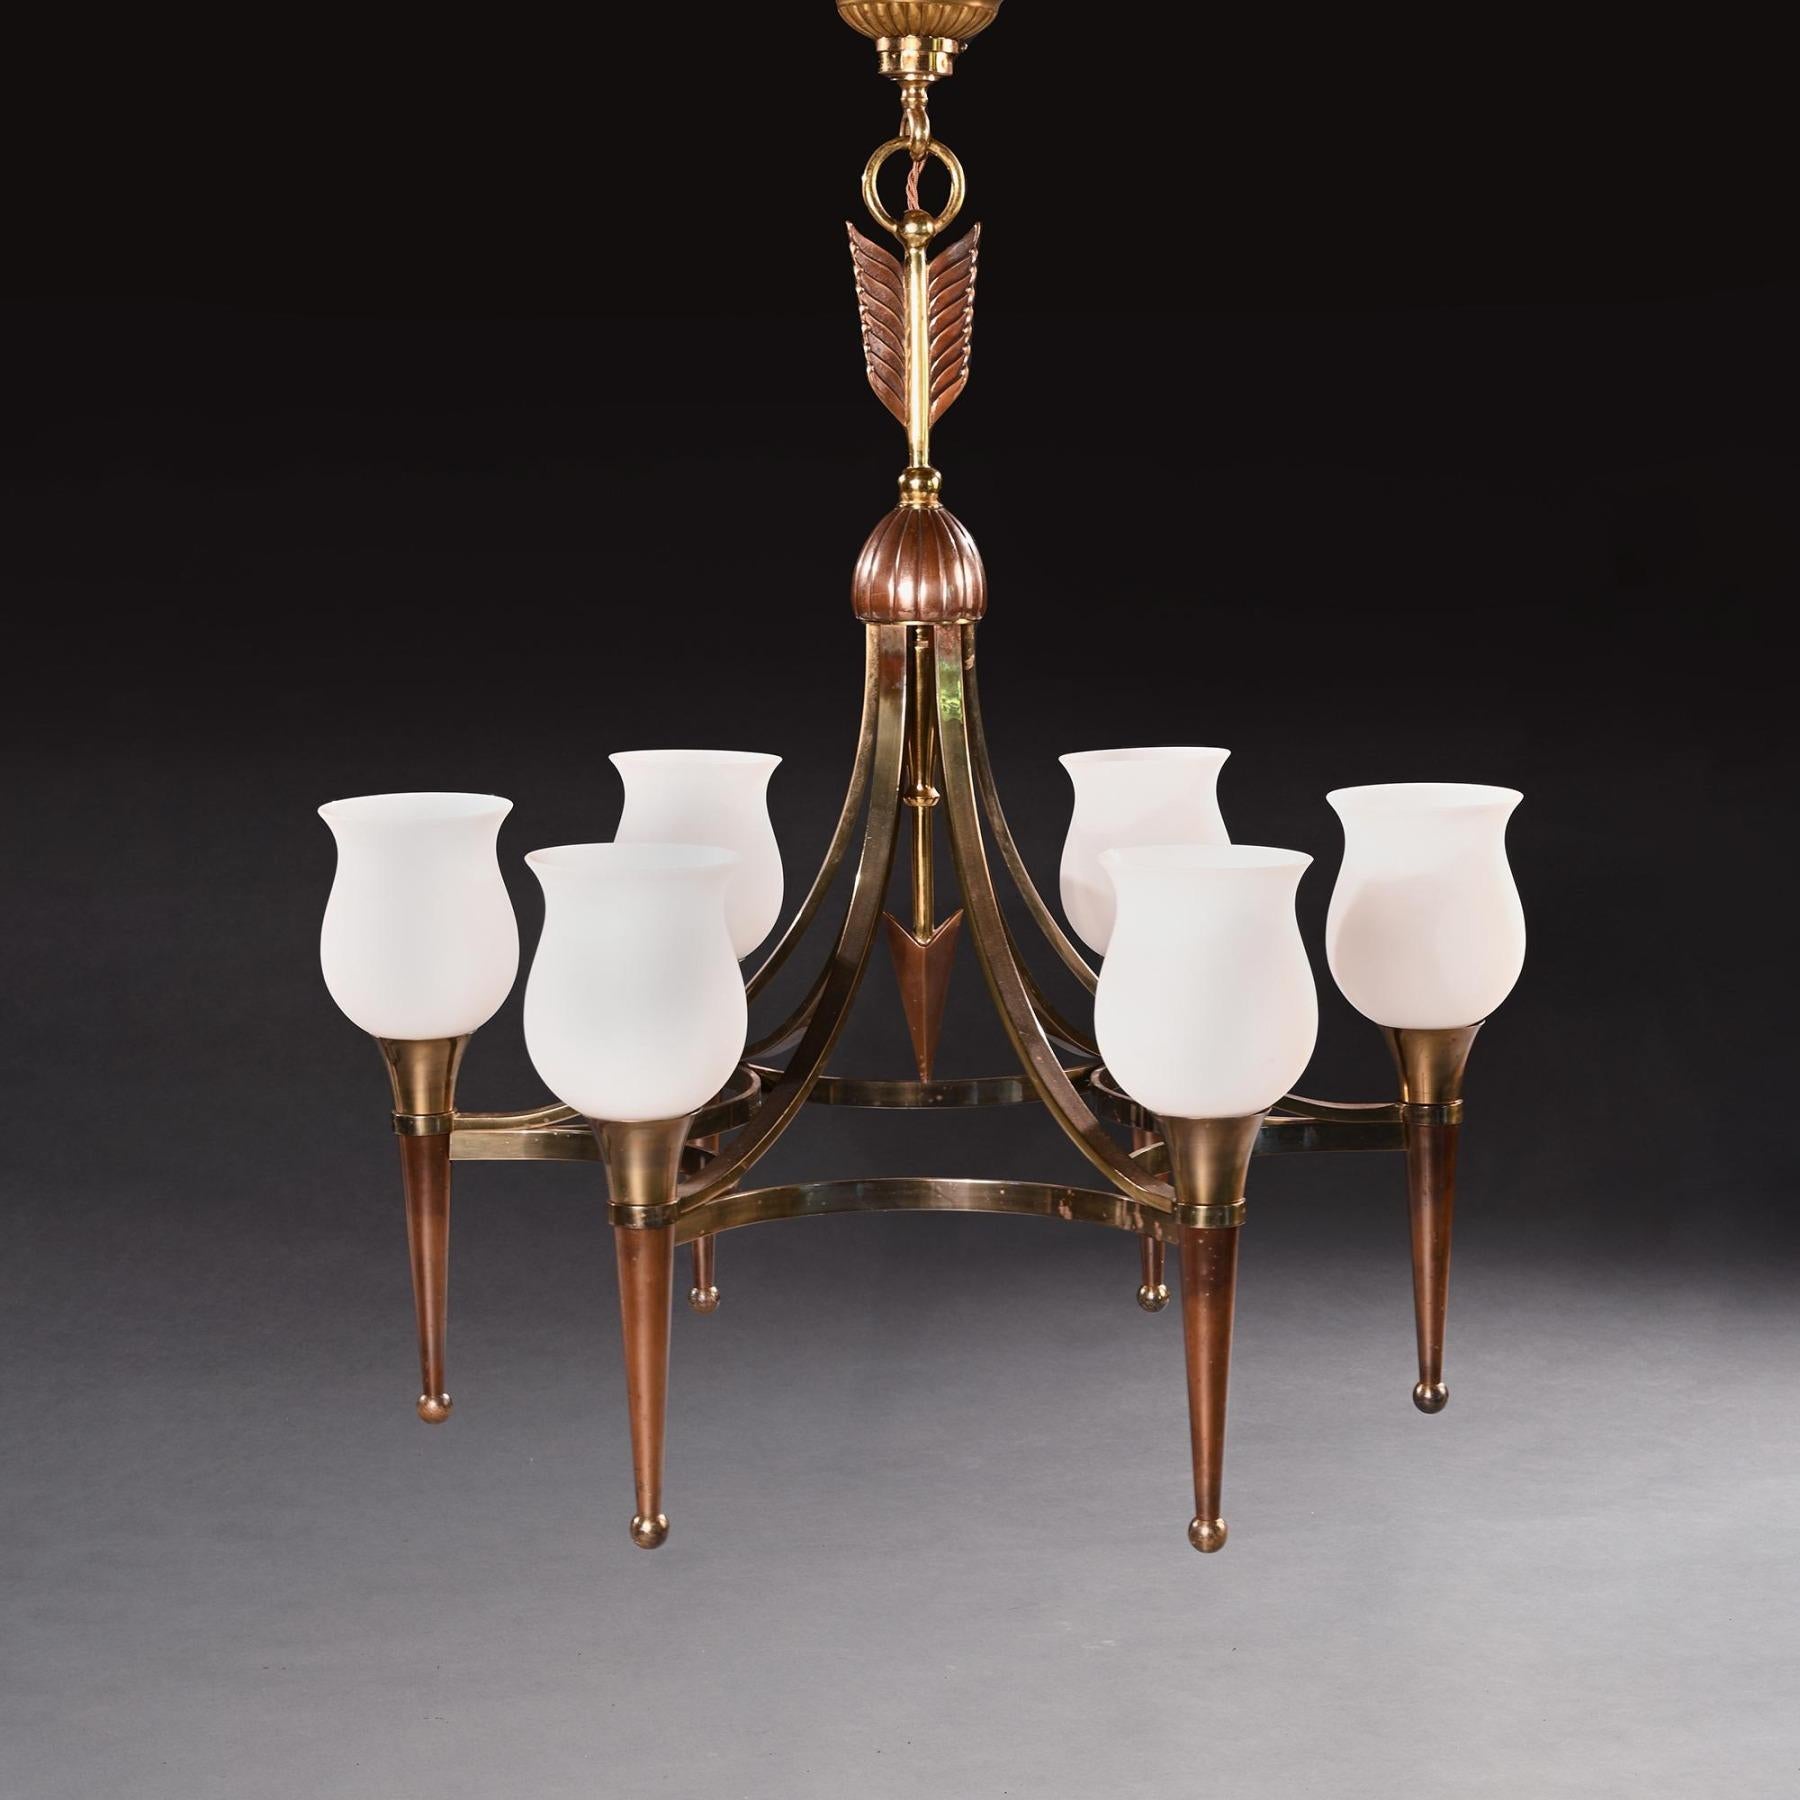 A very finely made pair of Mid Century chandeliers after a design attributed to Andre Arbus, most probably made by Maison Jansen

French Circa 1950

These chandeliers take cupid's arrow as their central design motif, the knop and arms extending from